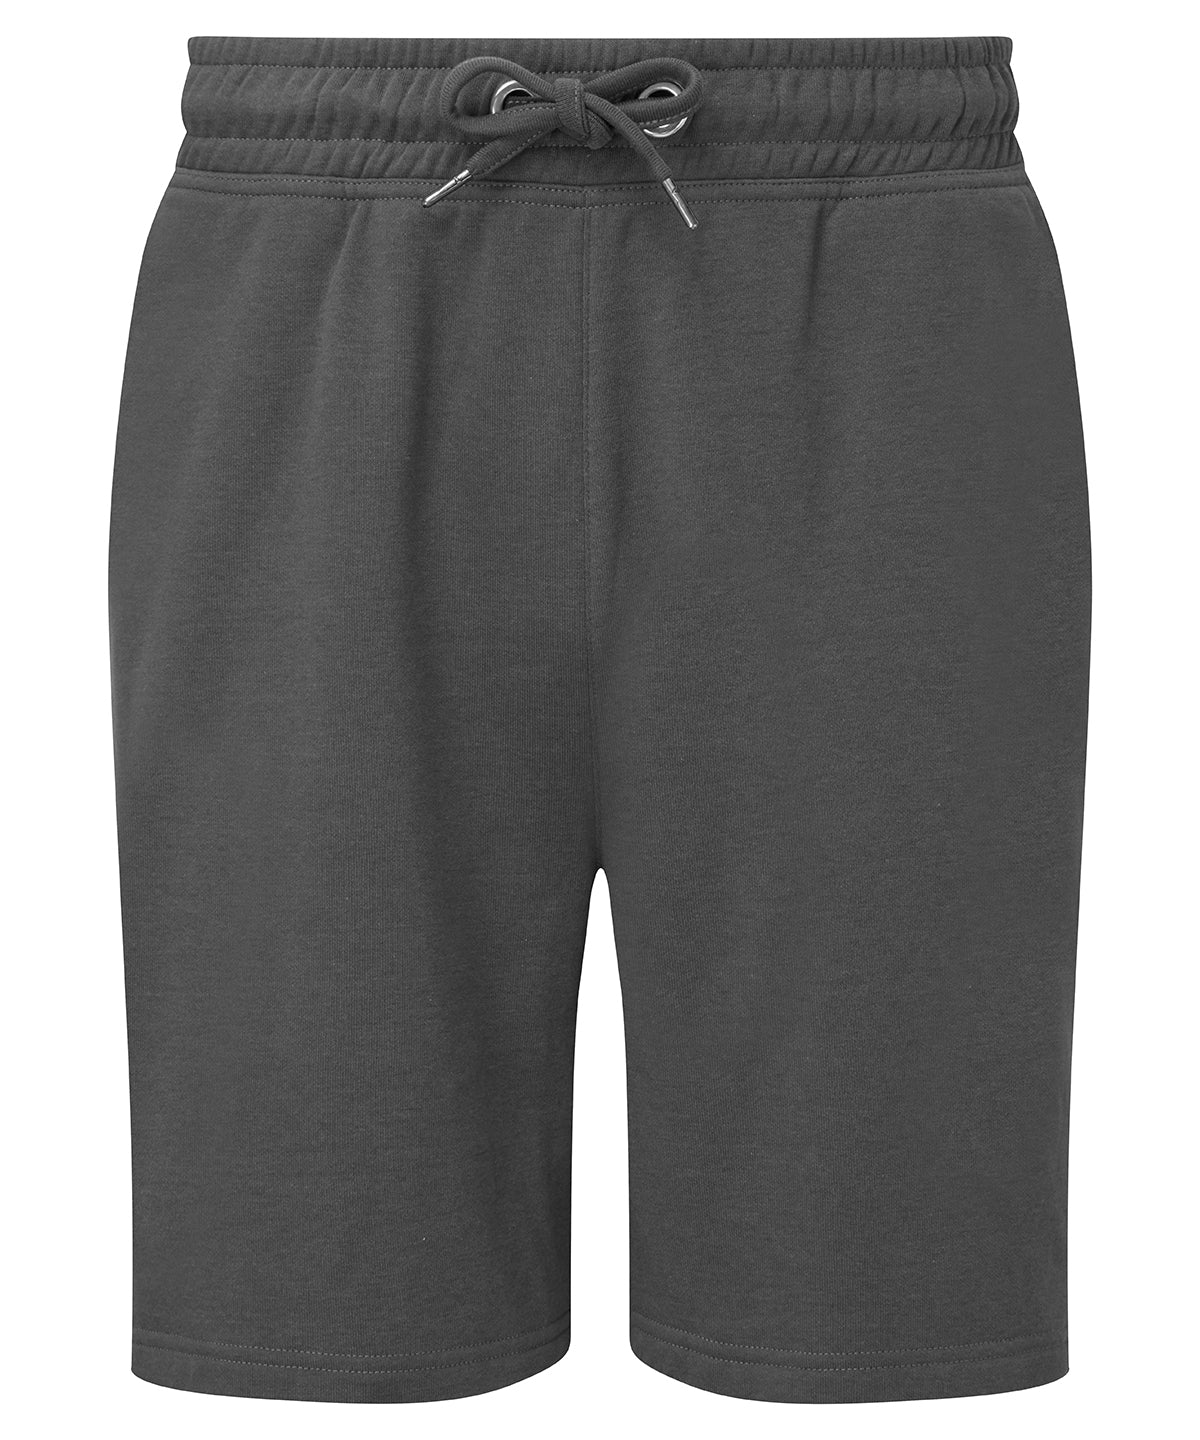 Charcoal - Men's TriDri® jogger shorts Shorts TriDri® Everyday Essentials, Exclusives, Must Haves, New For 2021, New In Autumn Winter, New In Mid Year, Street Casual, Streetwear, Tracksuits, Trousers & Shorts, Working From Home Schoolwear Centres